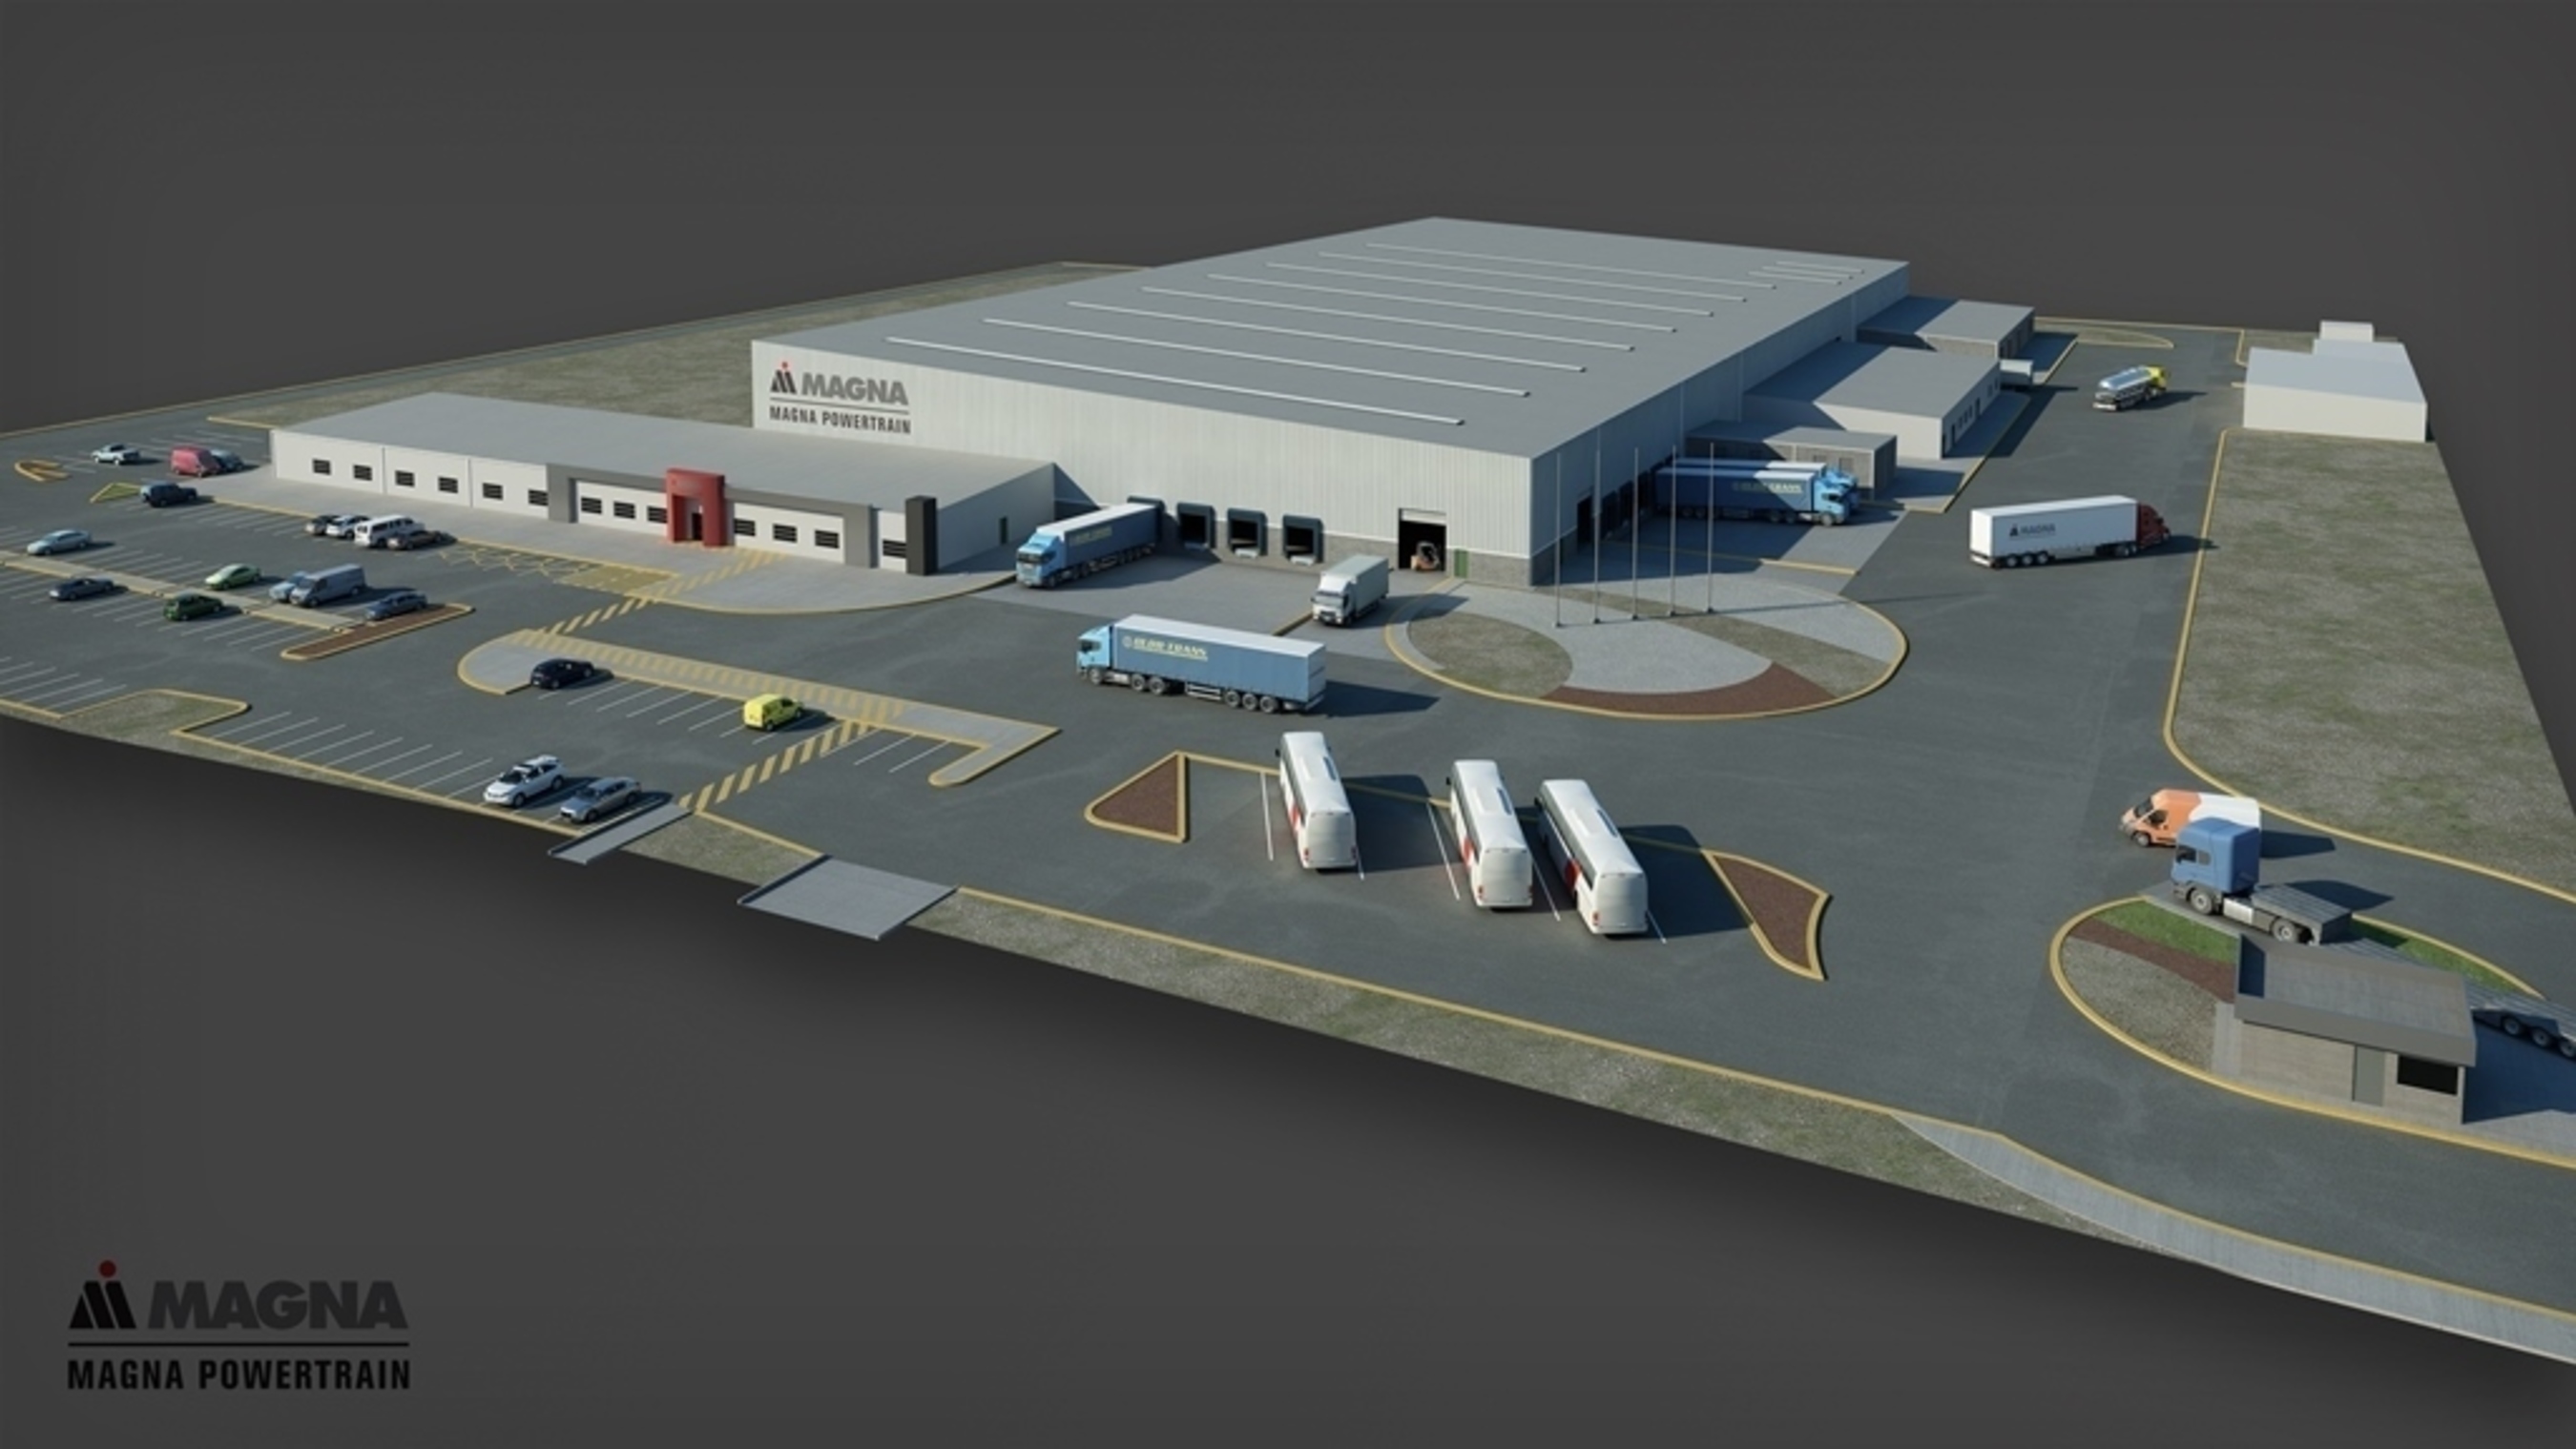 A rendering of Magna Powertrain's third building in Ramos Arizpe, Mexico, a 172,000-square-foot facility which will create jobs for an additional 230 people at full capacity and produce all-wheel drive systems for vehicles made by Volkswagens luxury brand Audi. (PRNewsFoto/Magna International Inc.)